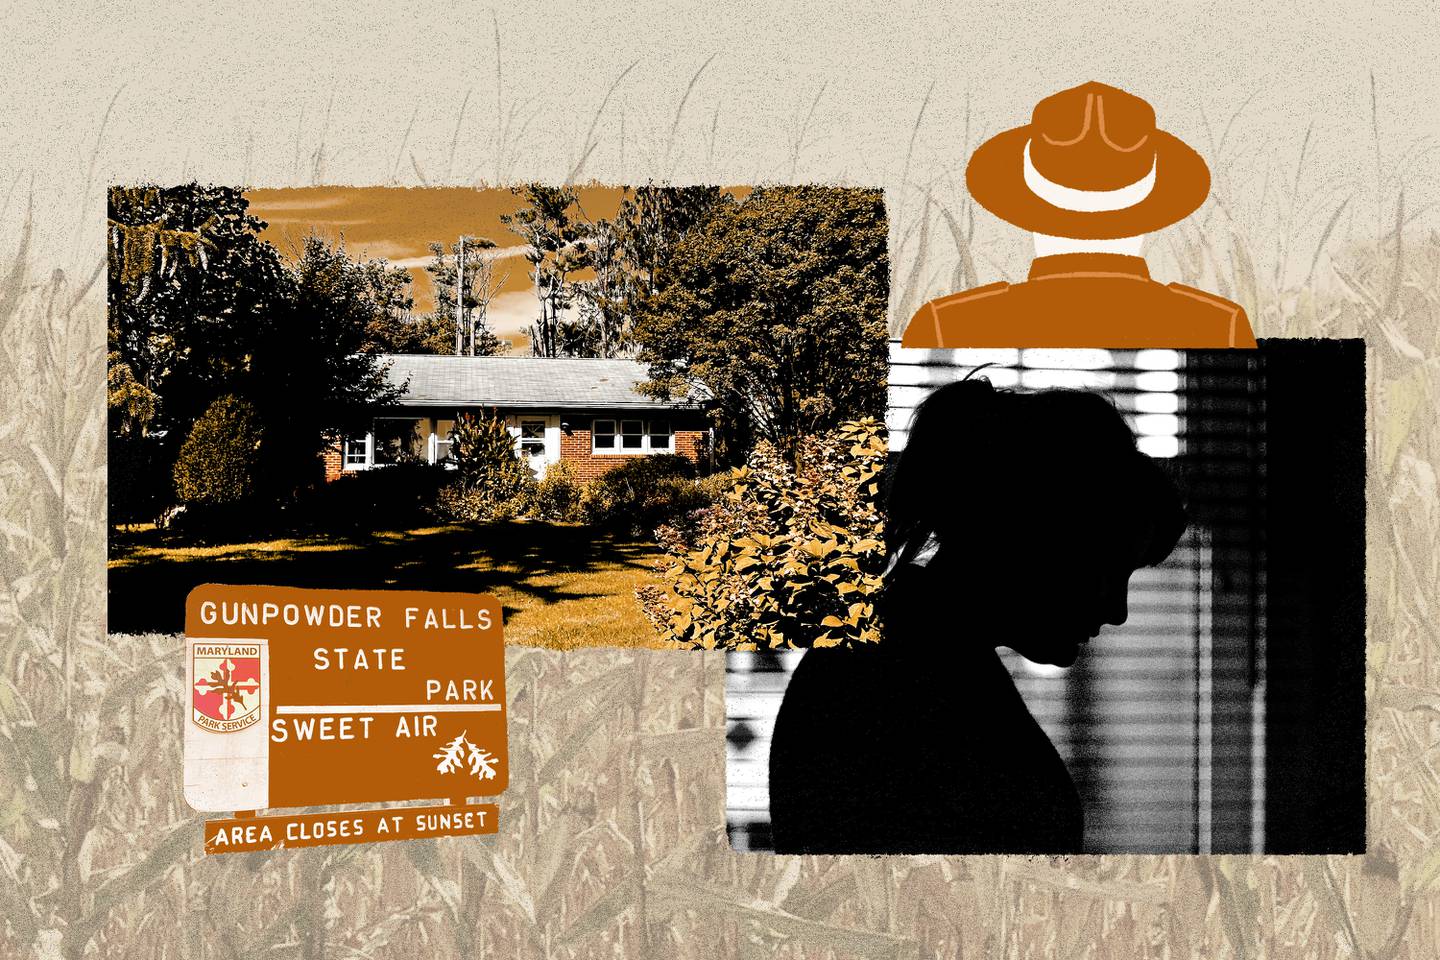 Collage of Gunpowder Falls park sign, ranger's house, ranger seen from behind, and woman in front of window